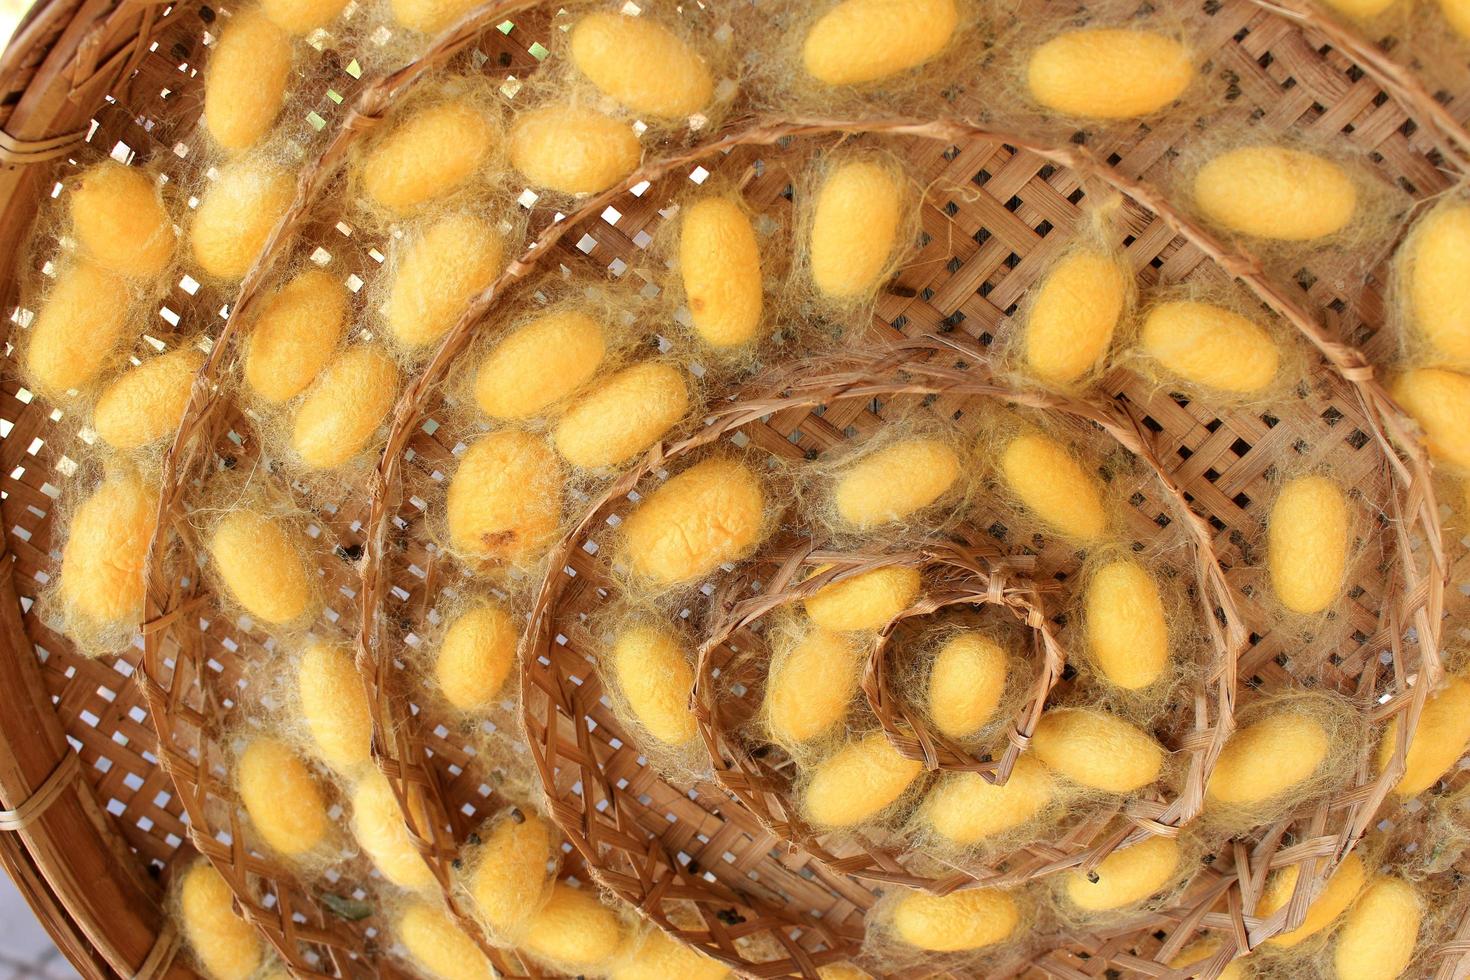 silk worm cocoons nests photo